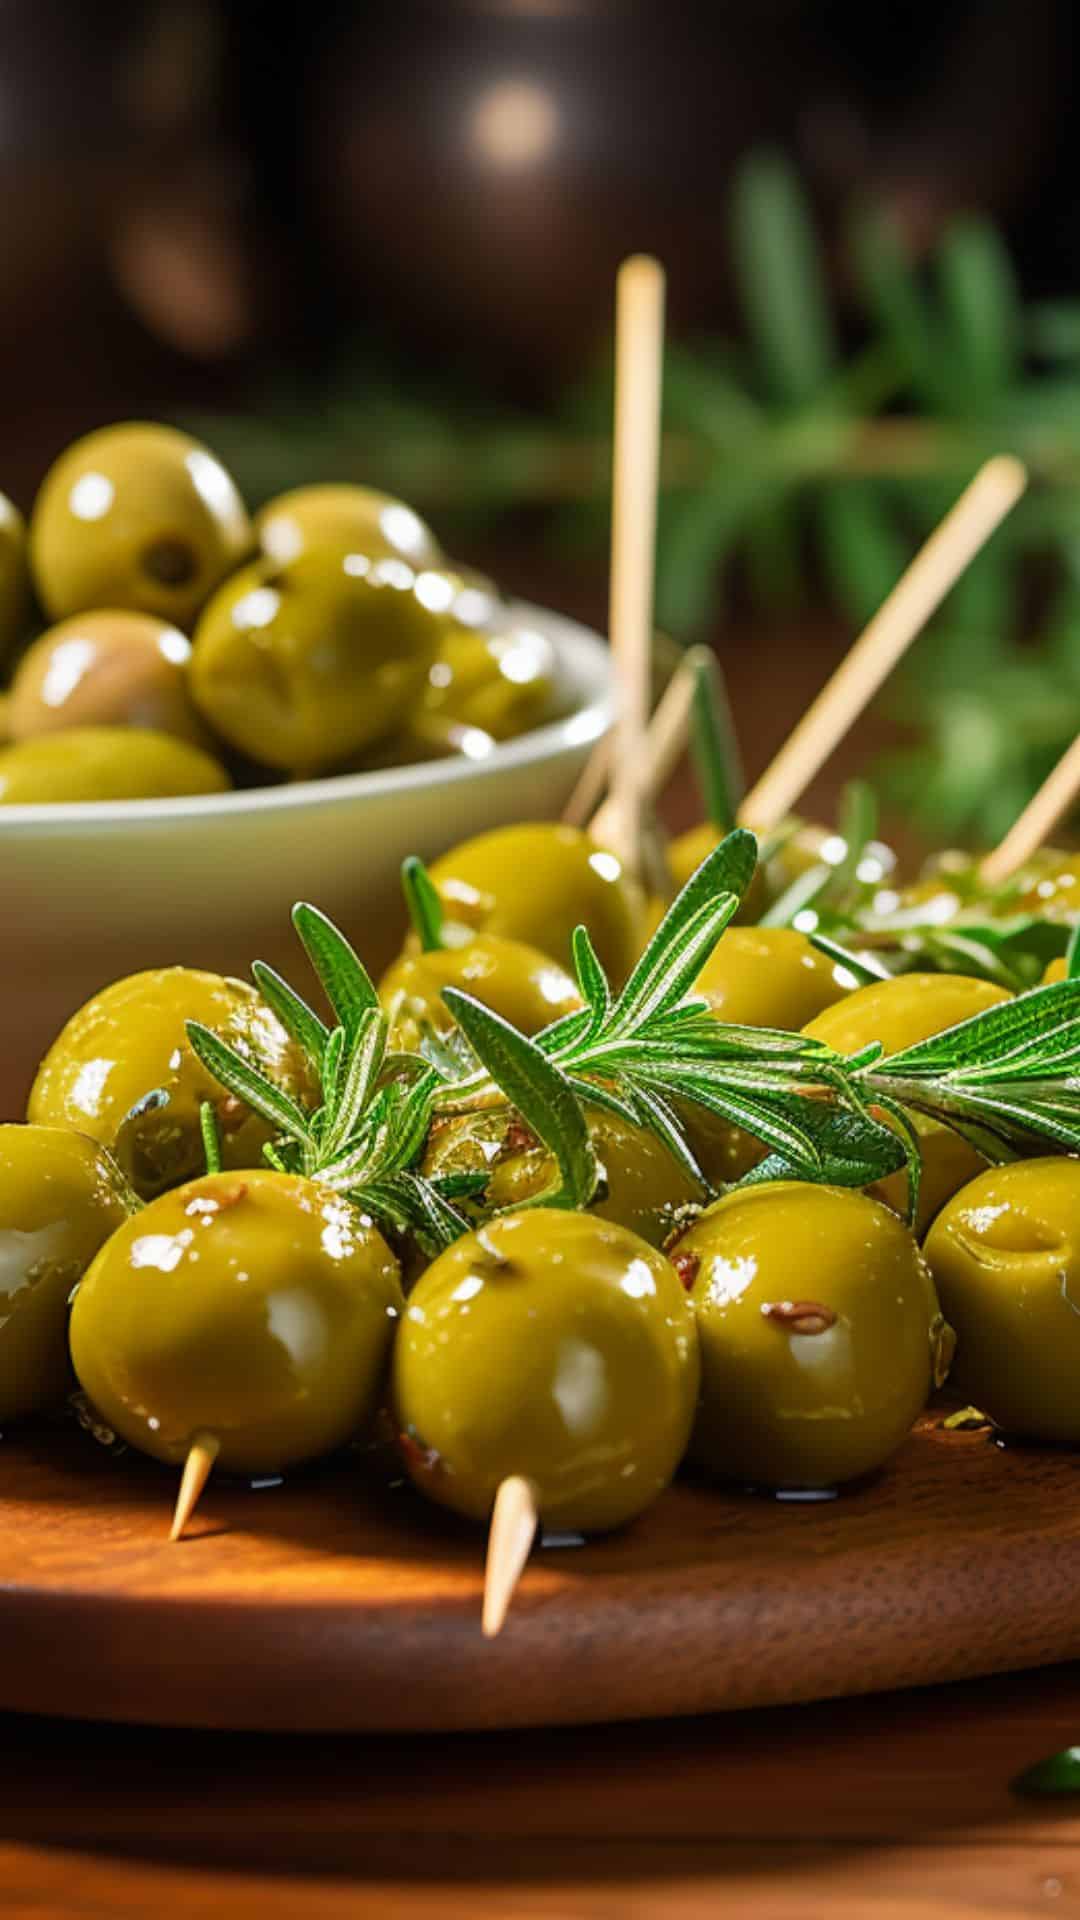 Green olives for garnishing a smoky martini recipe while optional they add brilliant color